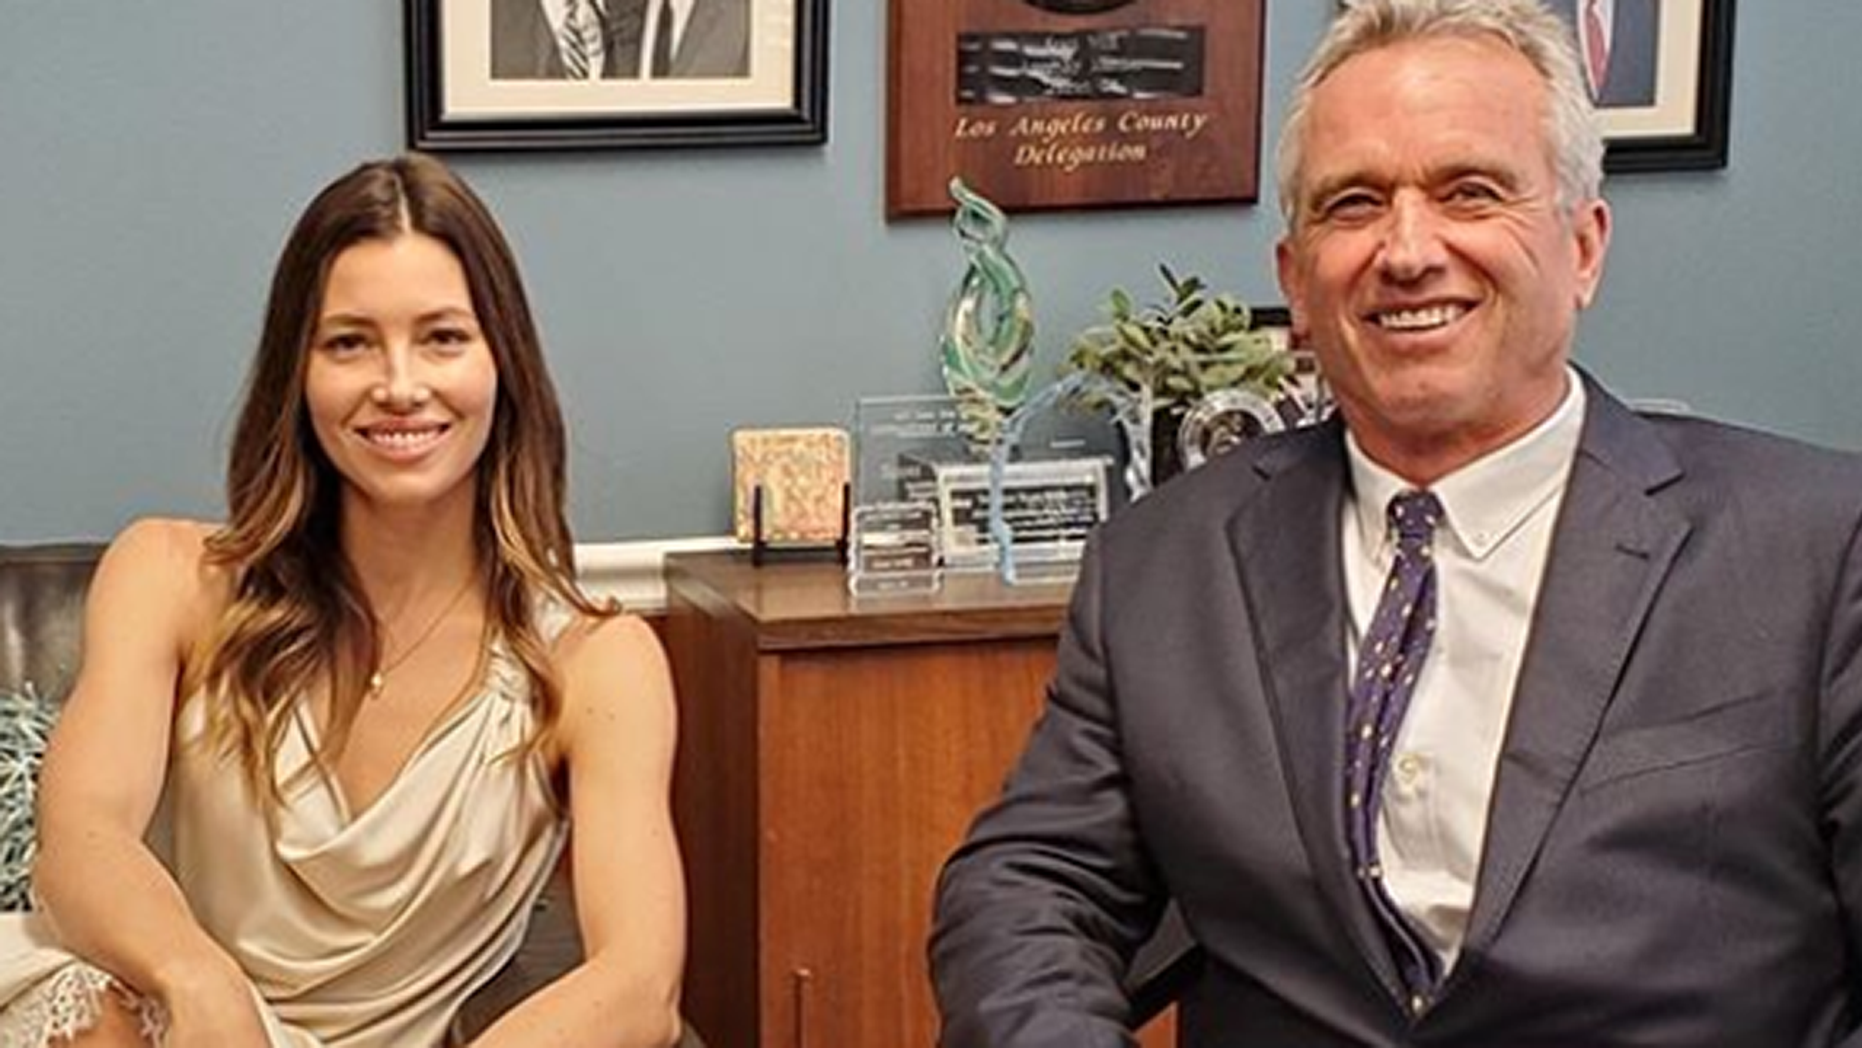 Jessica Biel poses with Robert F. Kennedy Jr. during her visit to California State Capitol (photo: Instagram)